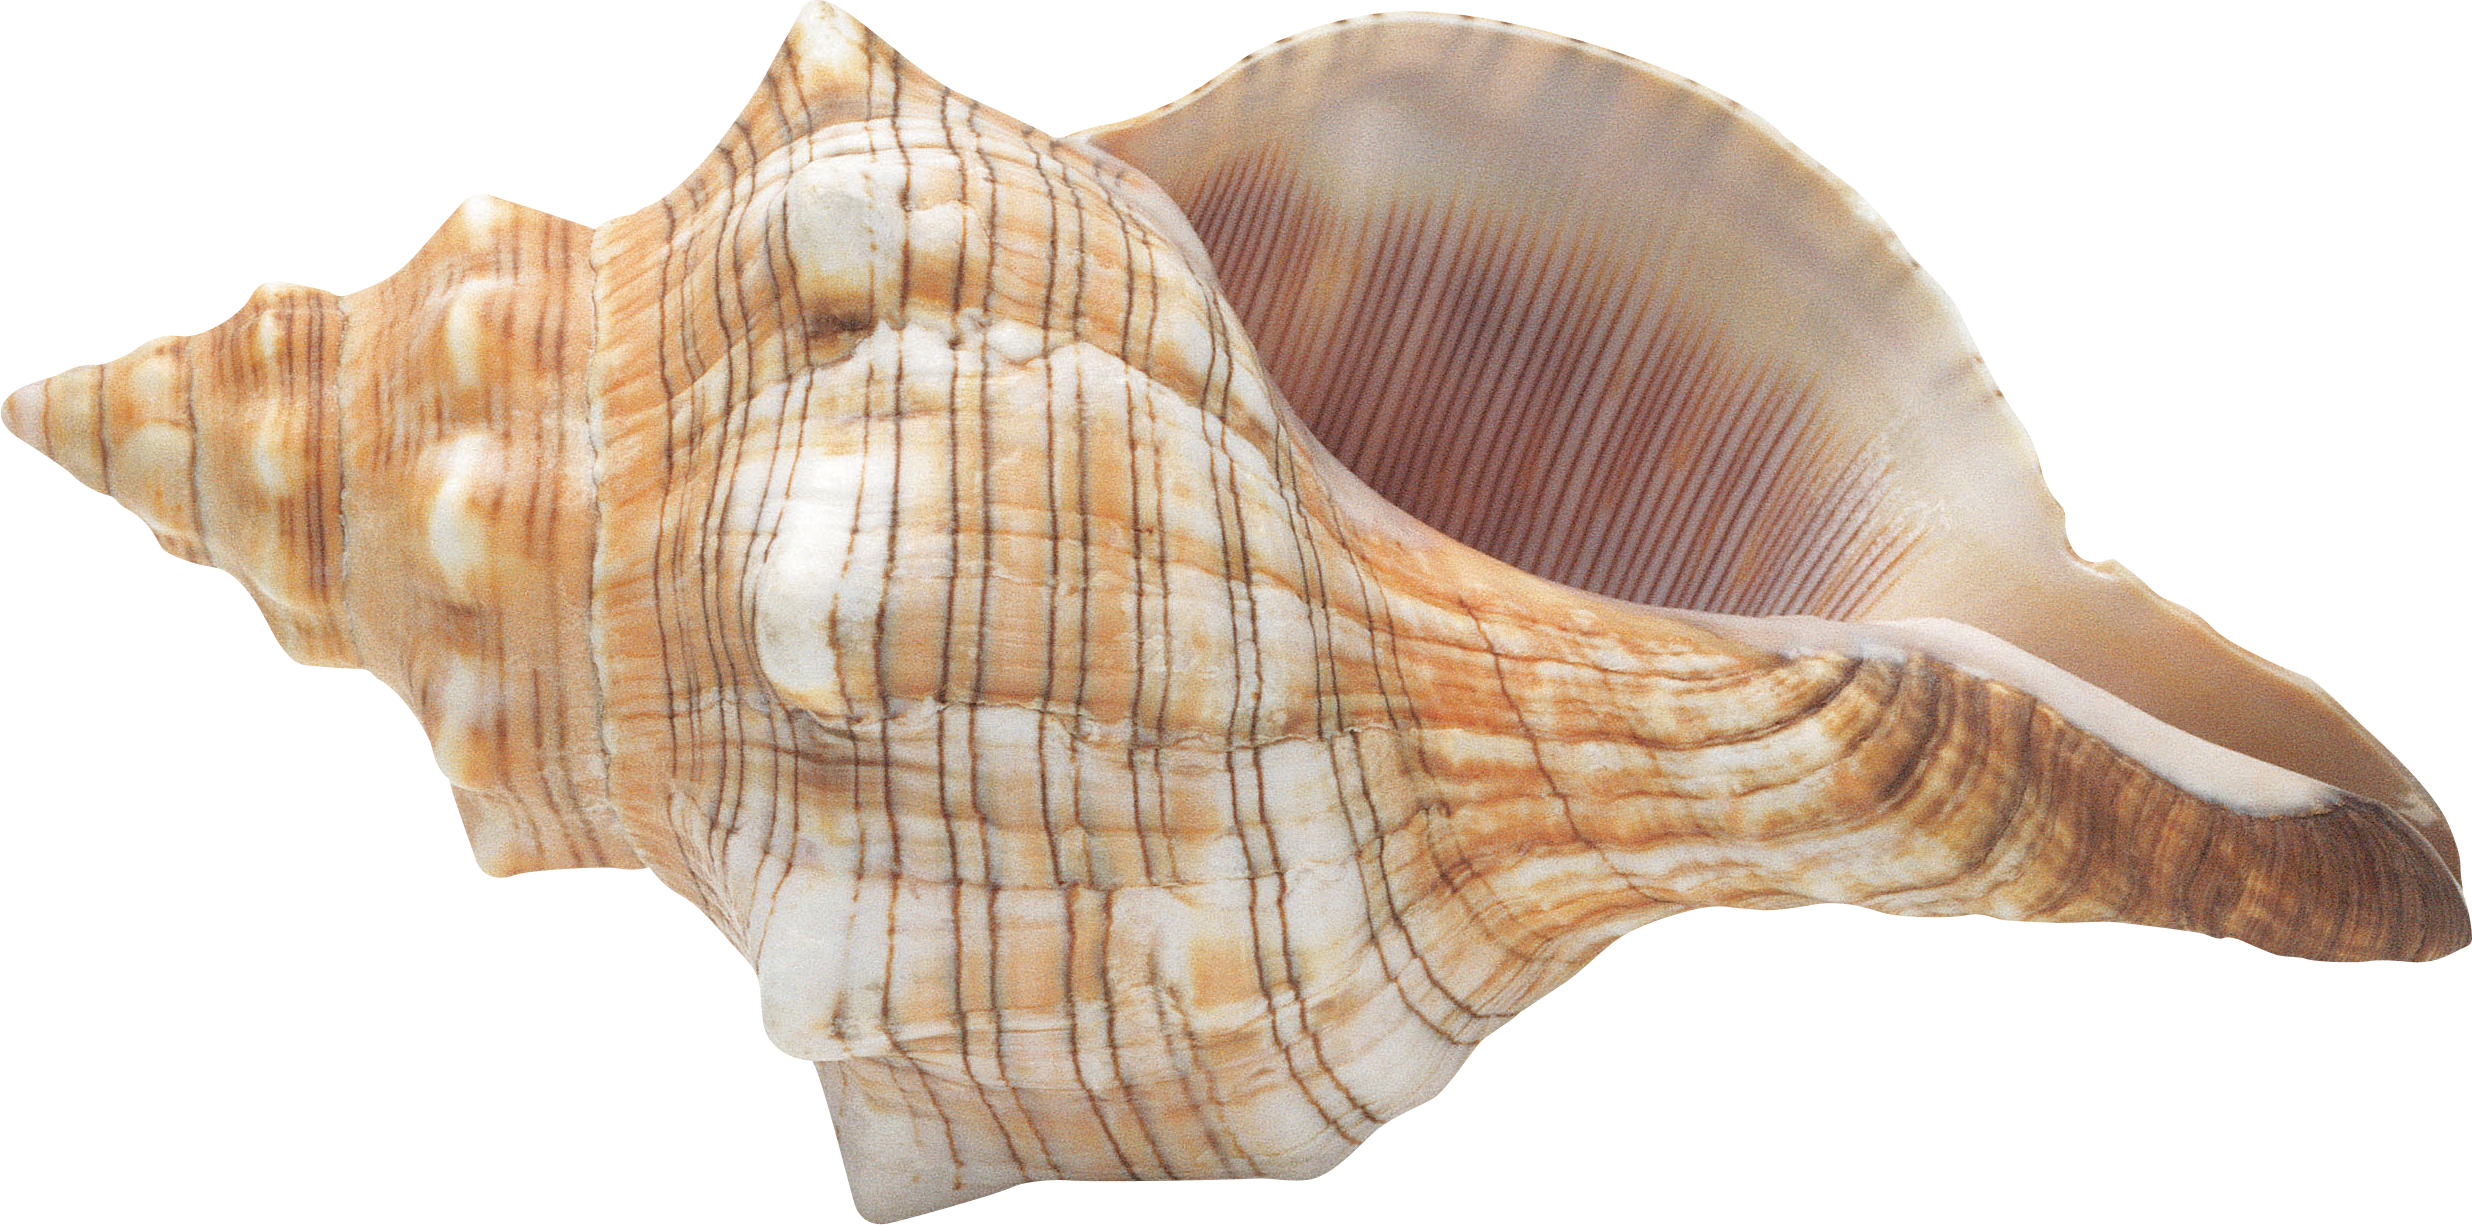 Seashell PNG images Download